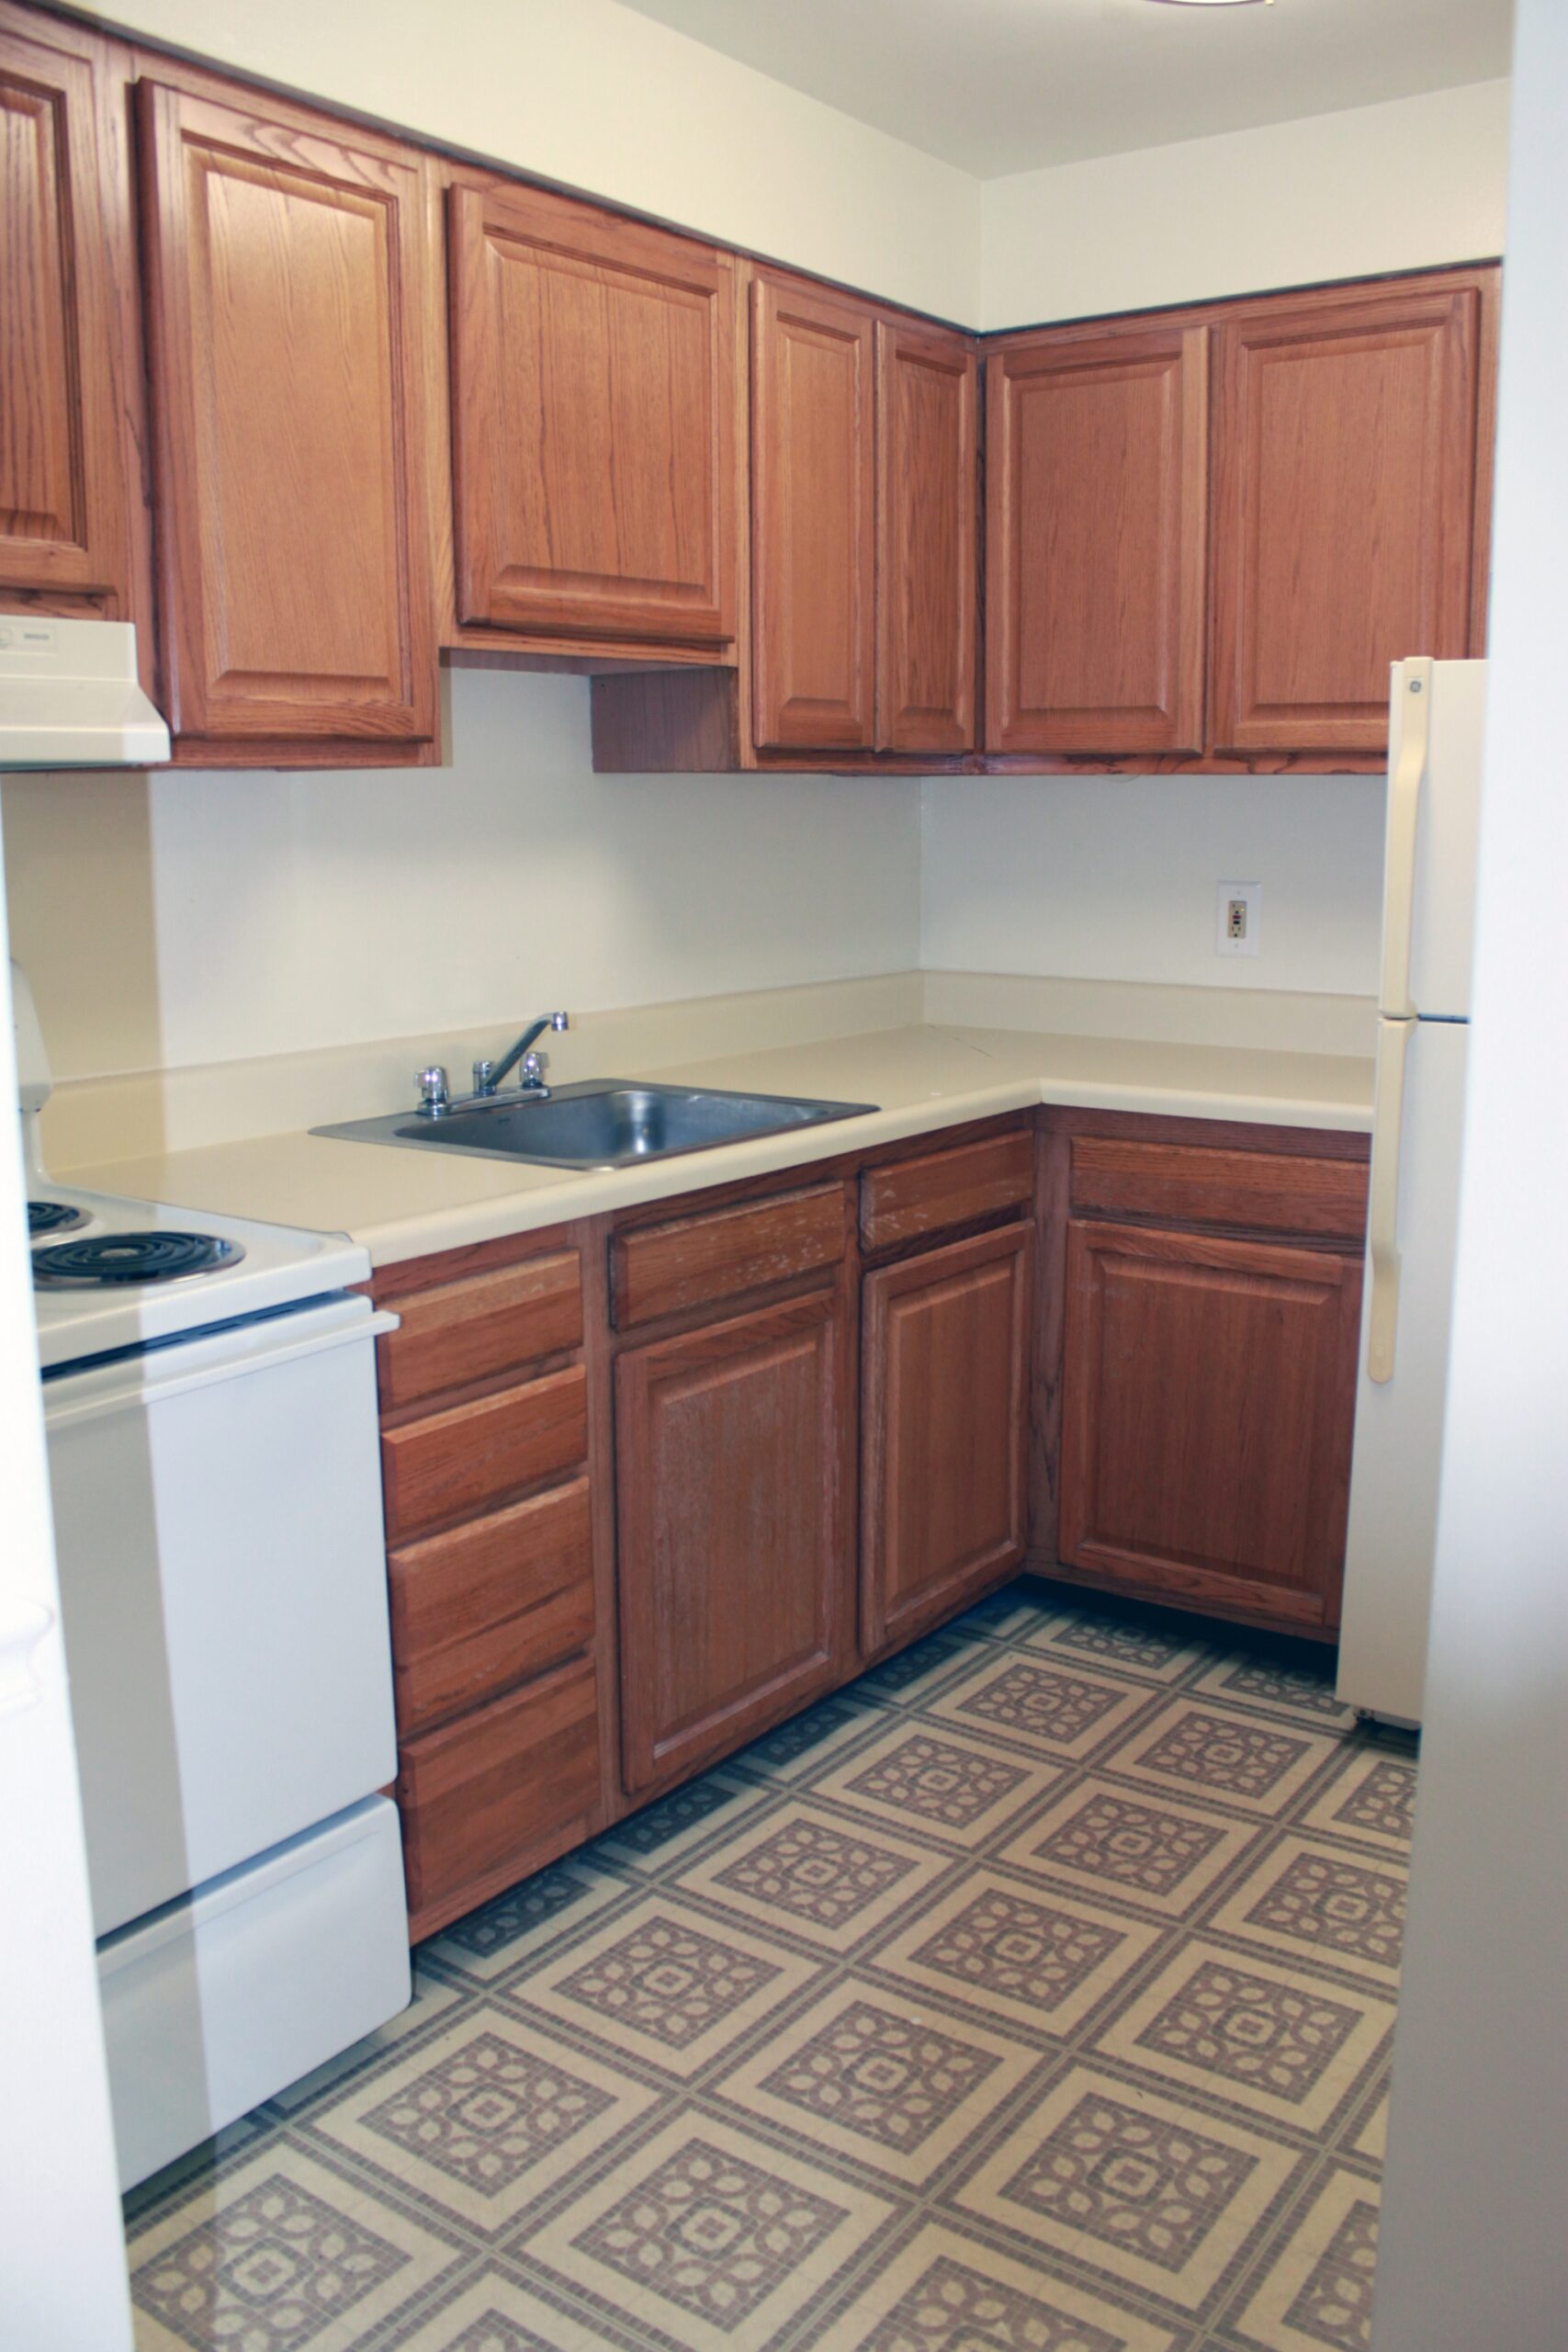 Kitchen area with wooden cabinets and white appliances in an apartment at Lansdale Village Apartments.